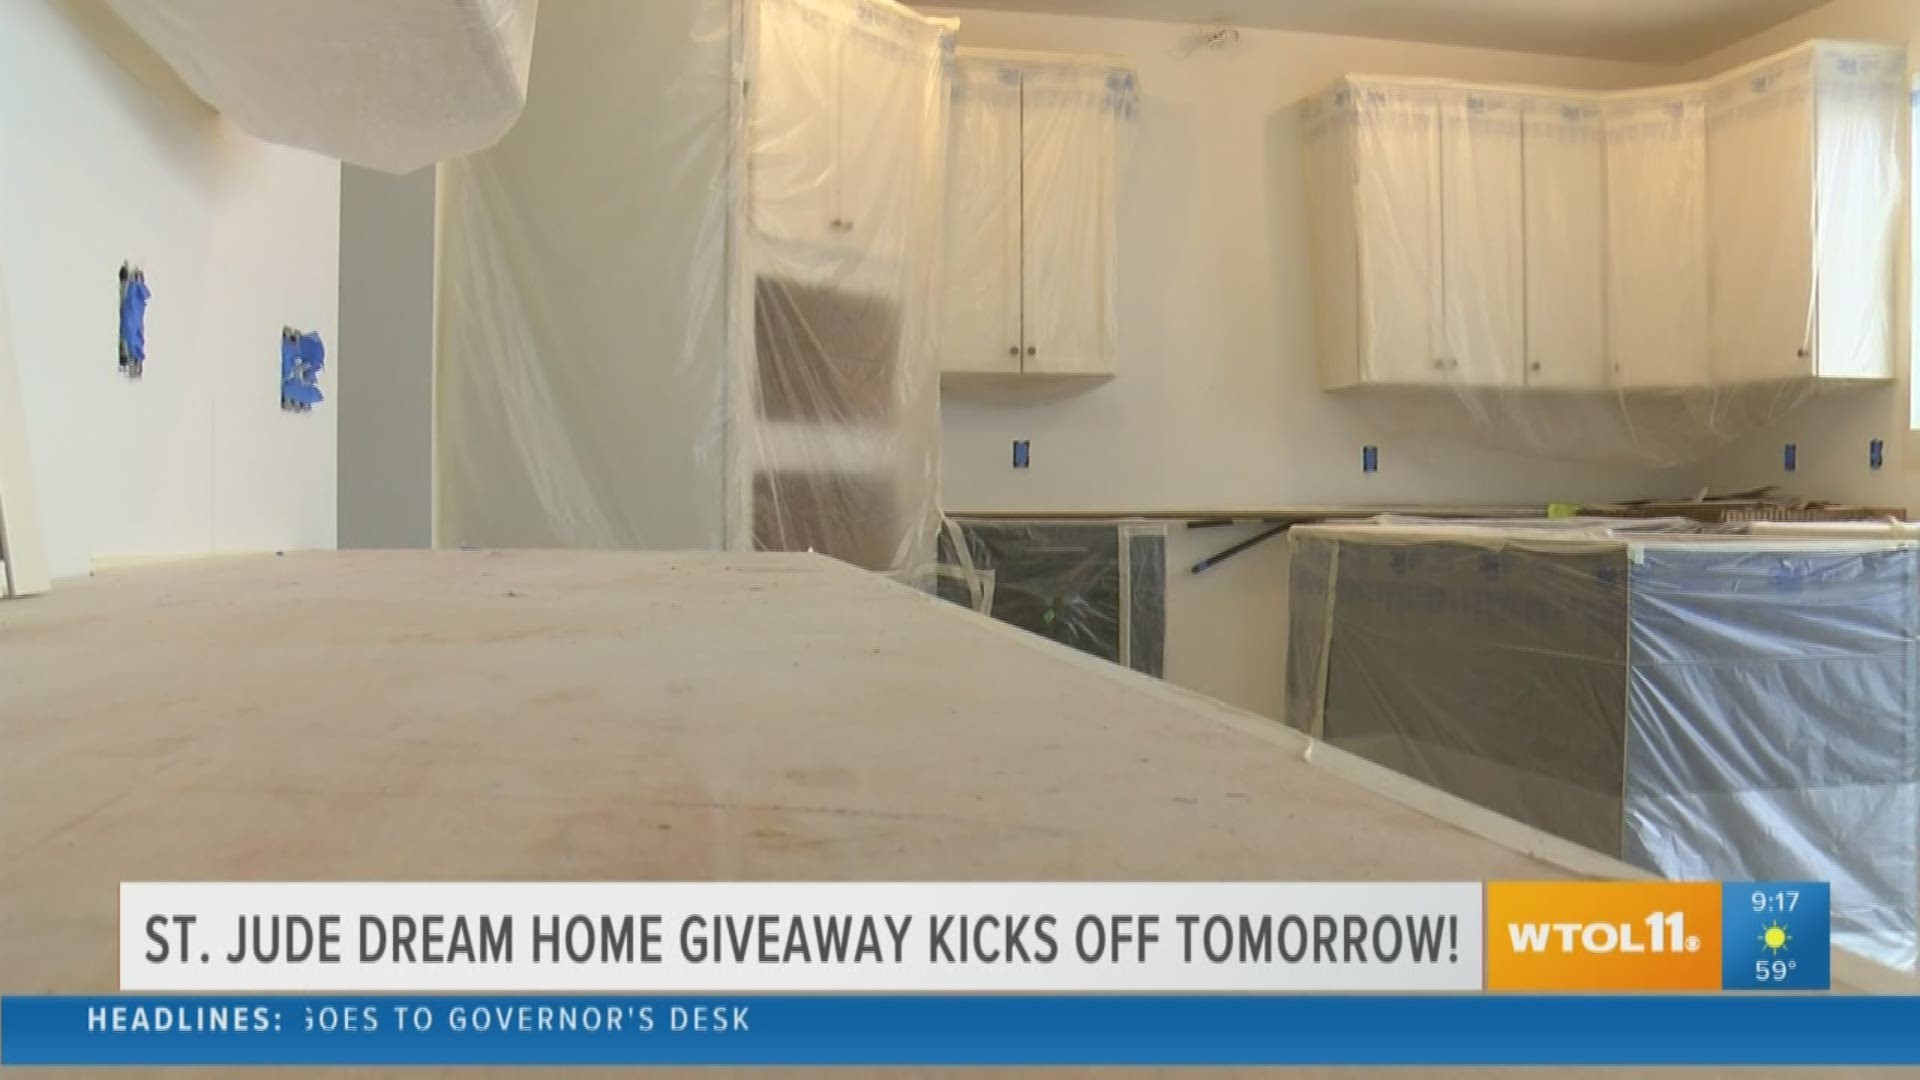 Reserve your ticket for the St. Jude Dream Home tomorrow!